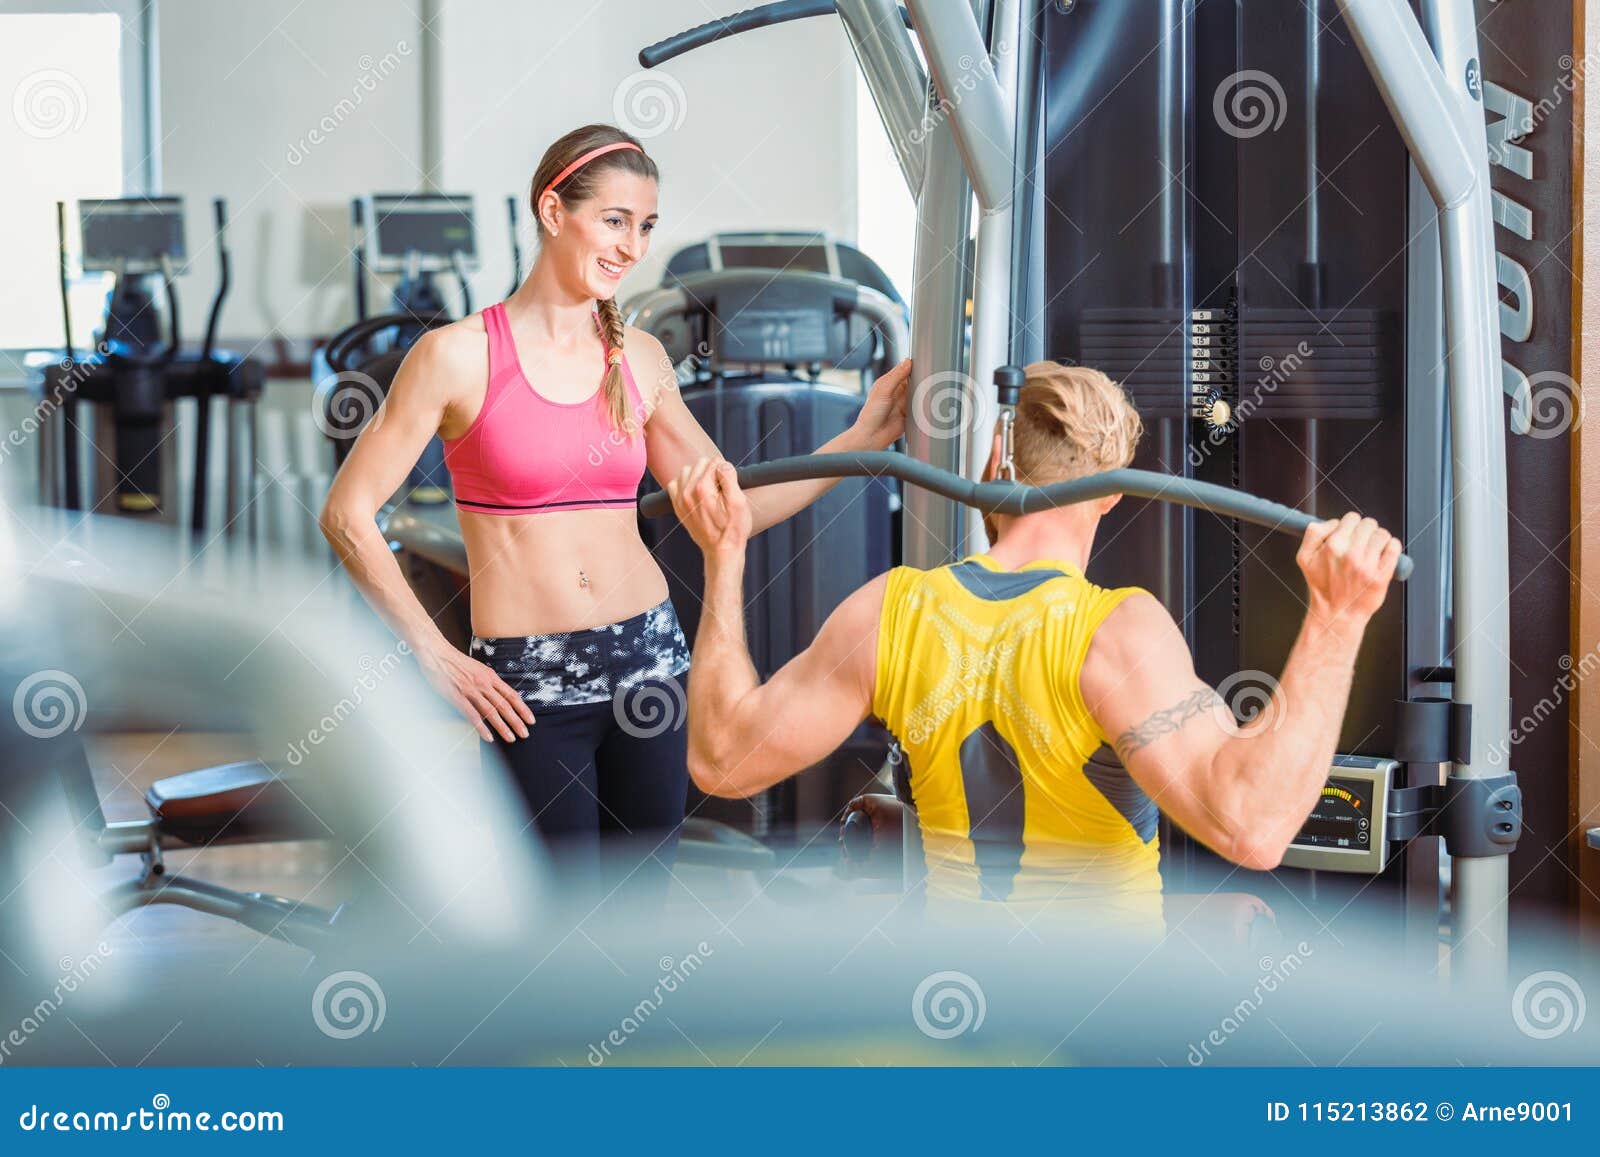 fit beautiful woman smiling with admiration at a strong man in the gym